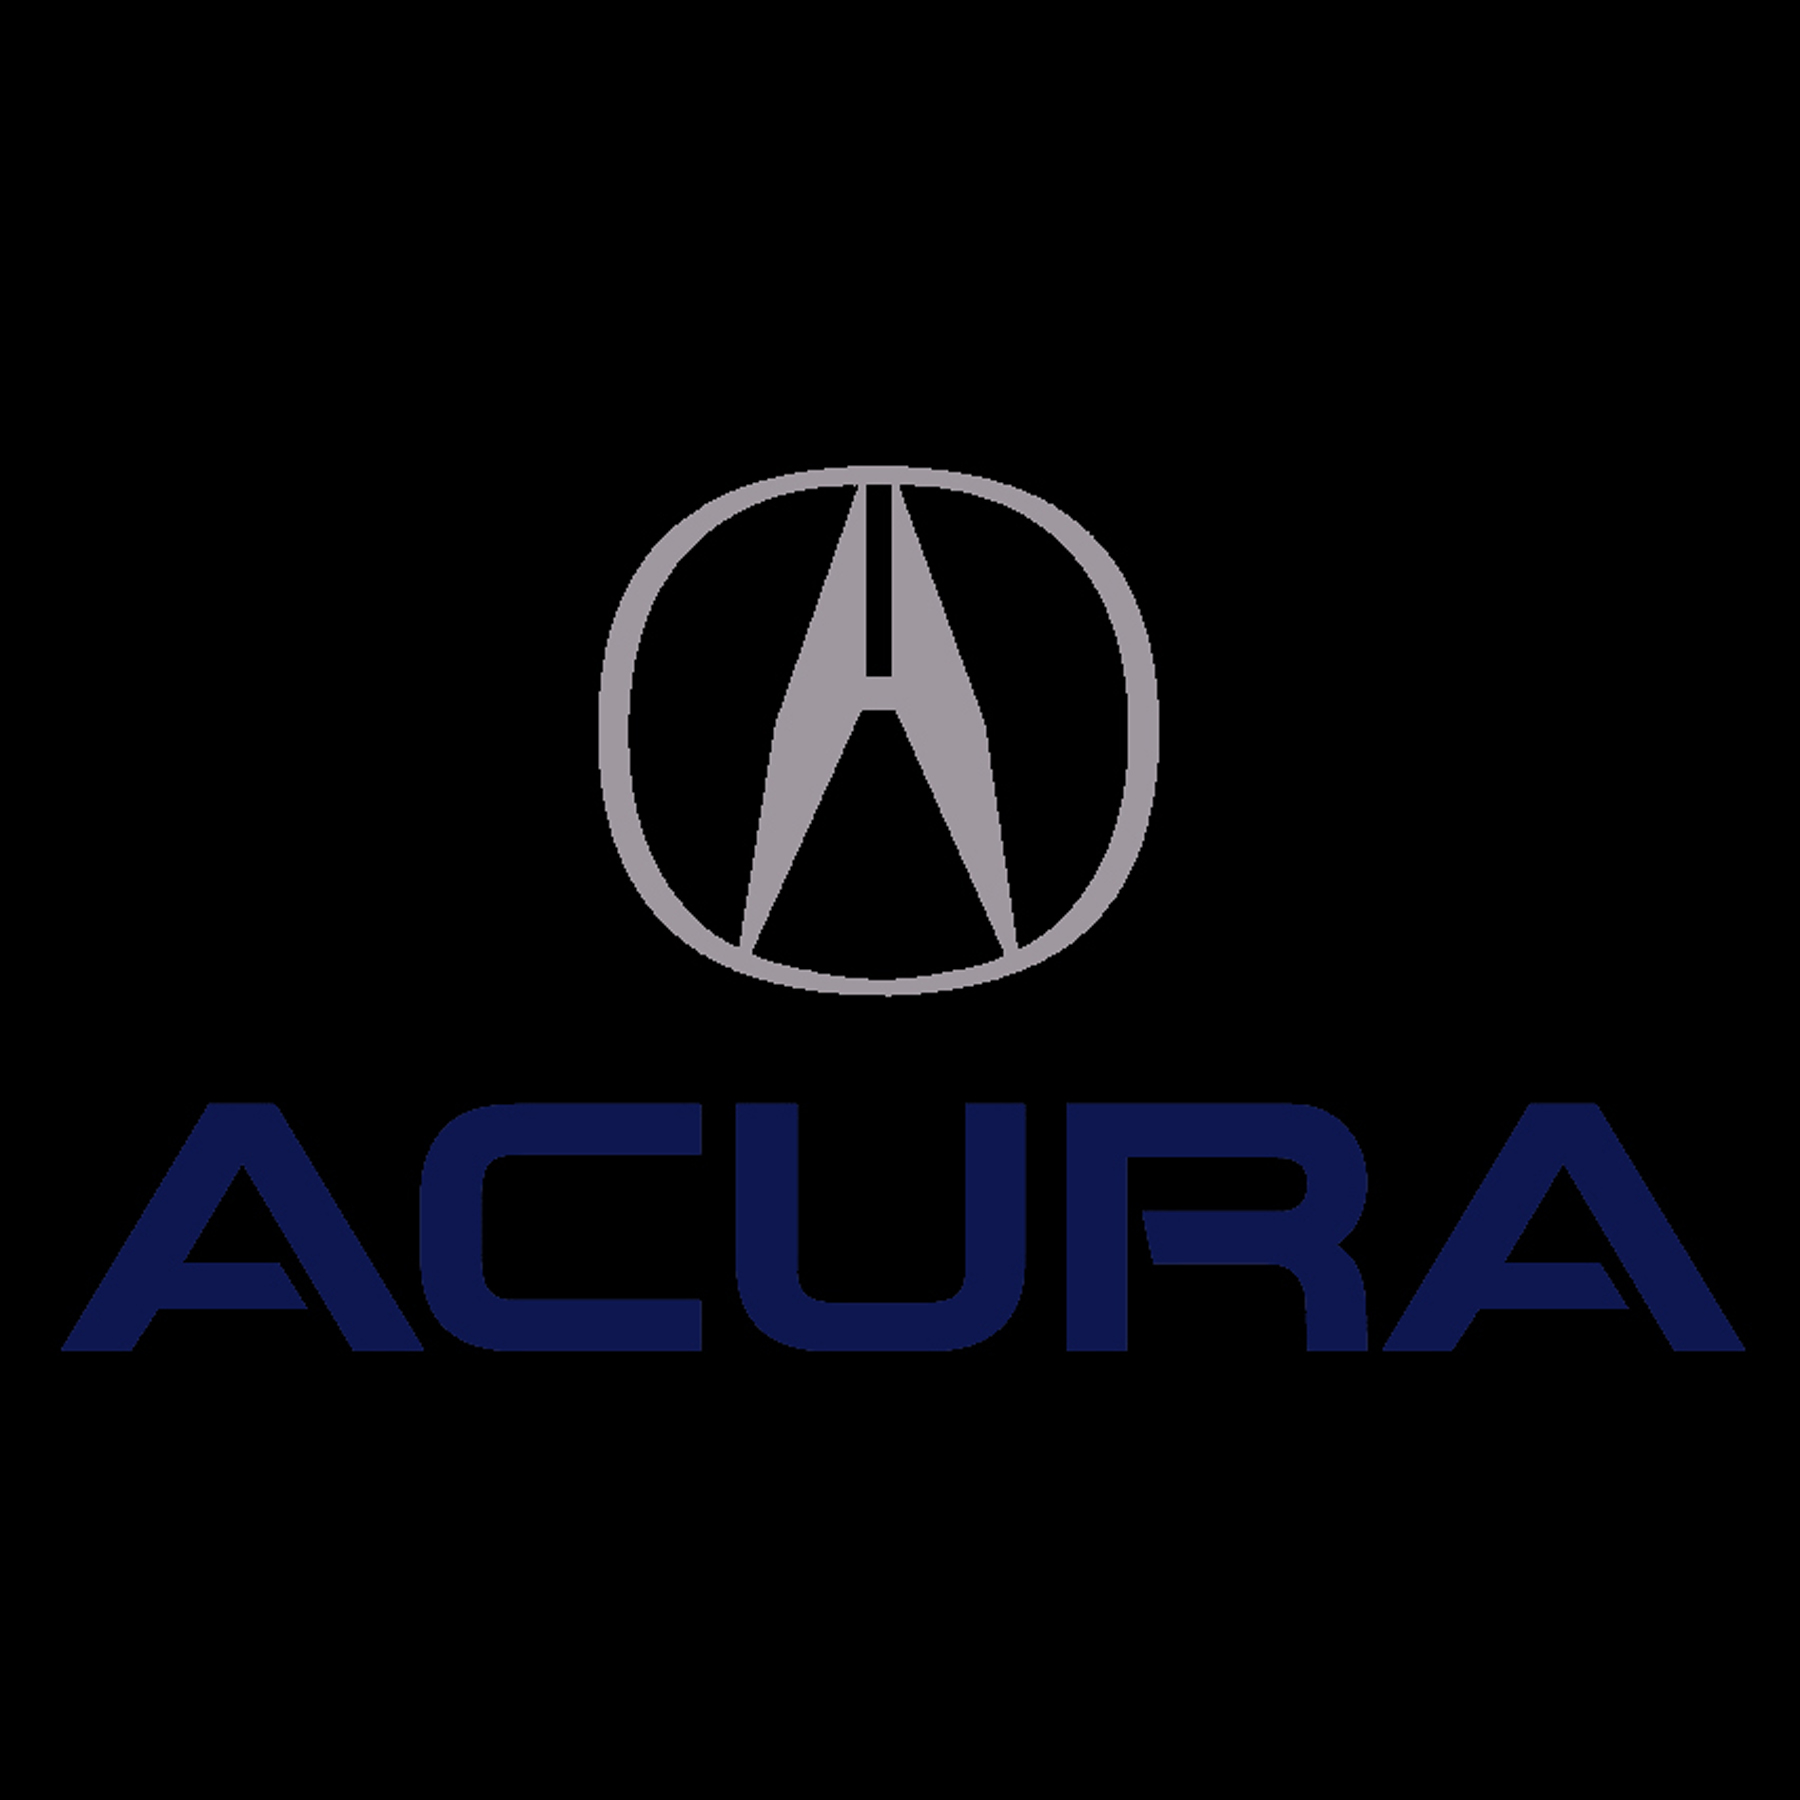 Acura Logo Png Image